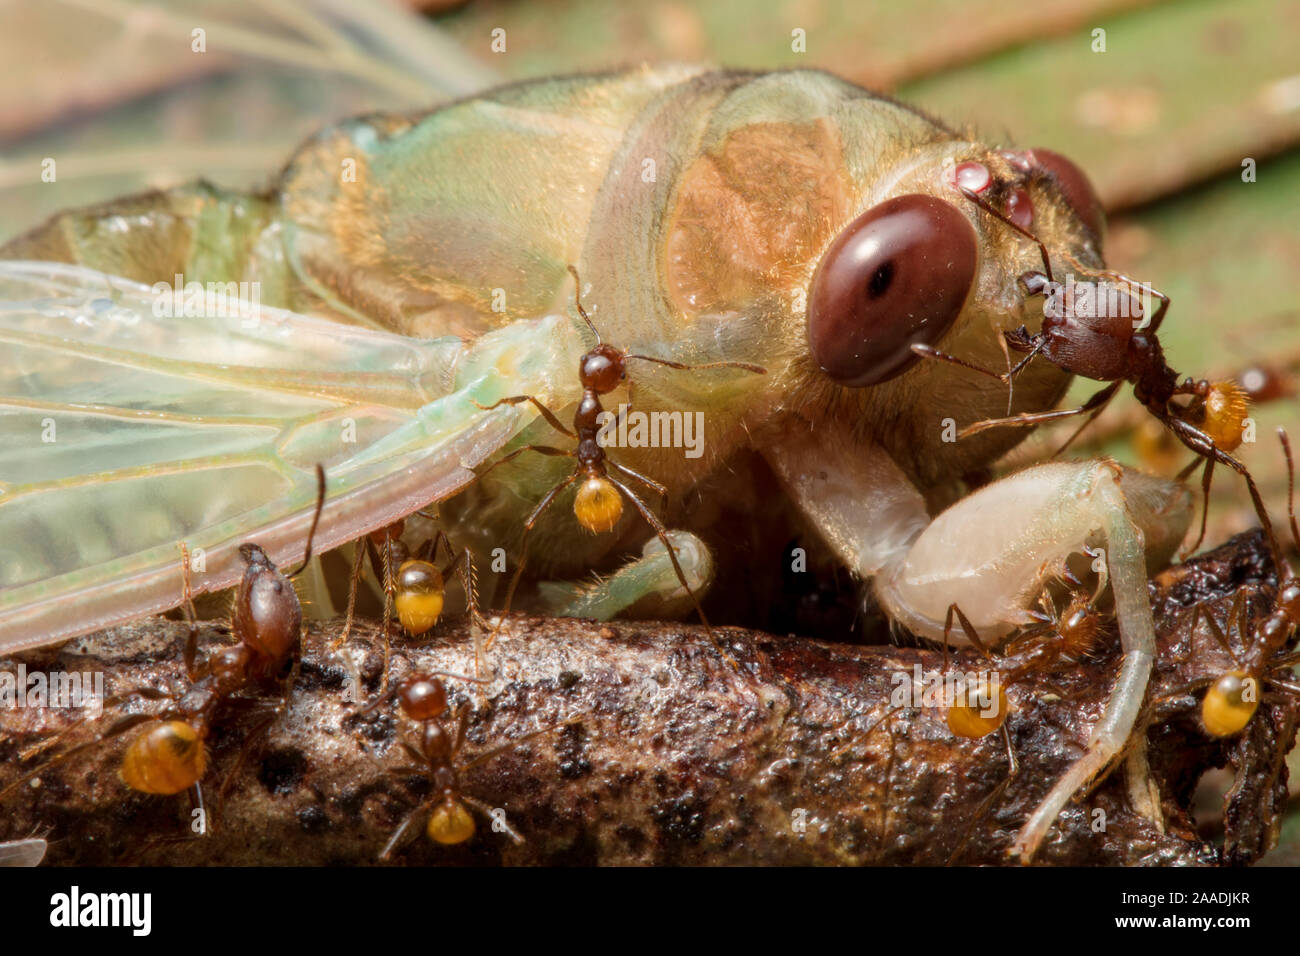 Ants (Formicidae) attacking newly emerged cicada (Cicadacae), Yasuni National Park, Ecuador . Highly commended in the Invertebrates Category of the Wildlife Photographer of the Year Awards (WPOY) Competition 2017. Stock Photo